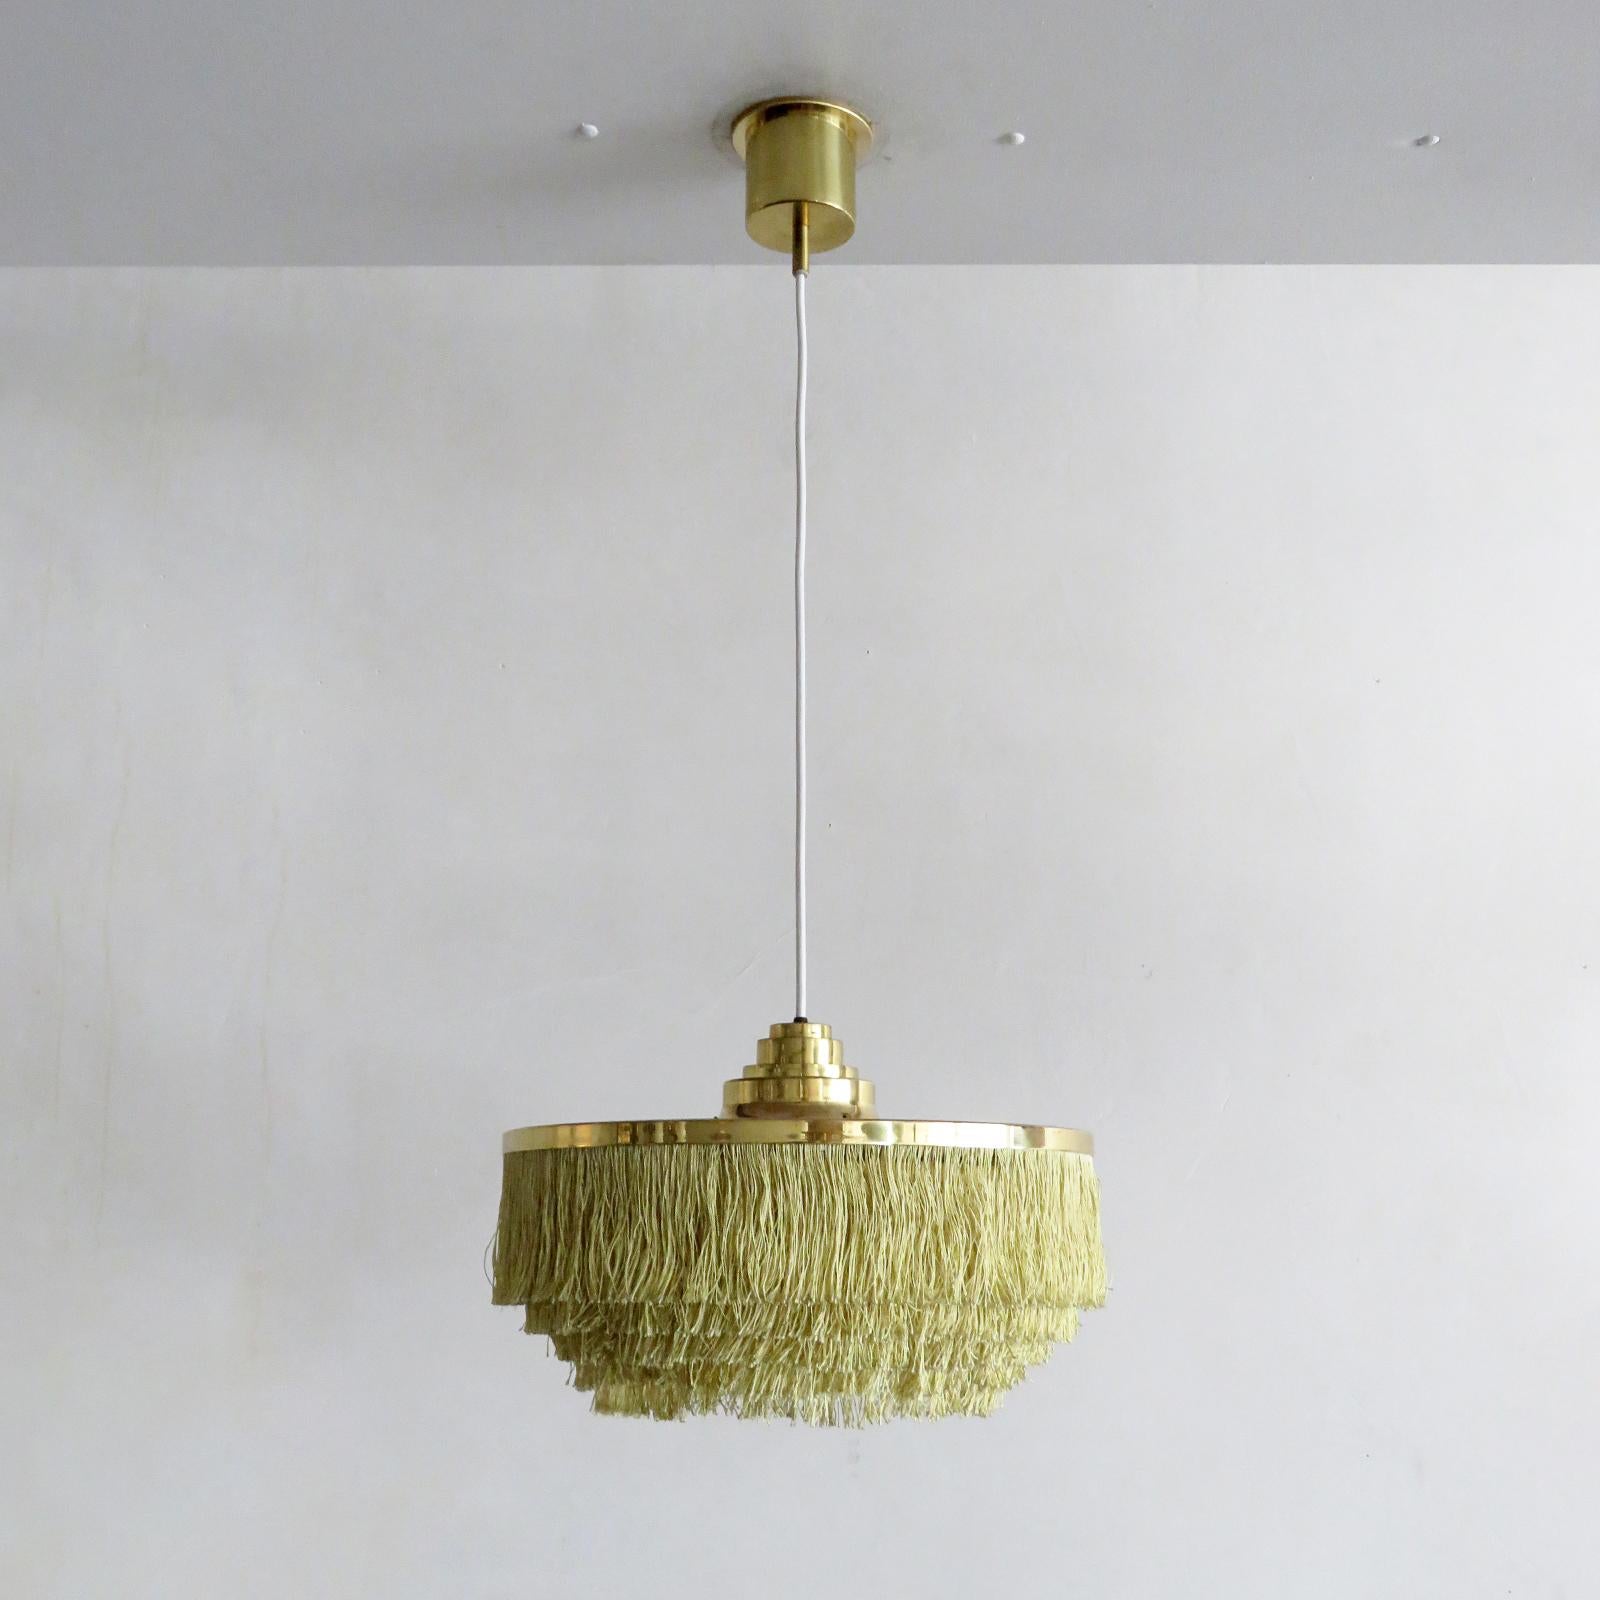 Wonderful pendant lamp by Hans-Agne Jakobsson for Markaryd, Sweden, 1960, with five tiers of yellow/gold fringe silk cord with brass hardware frame and original brass canopy. Overall drop (shown @36